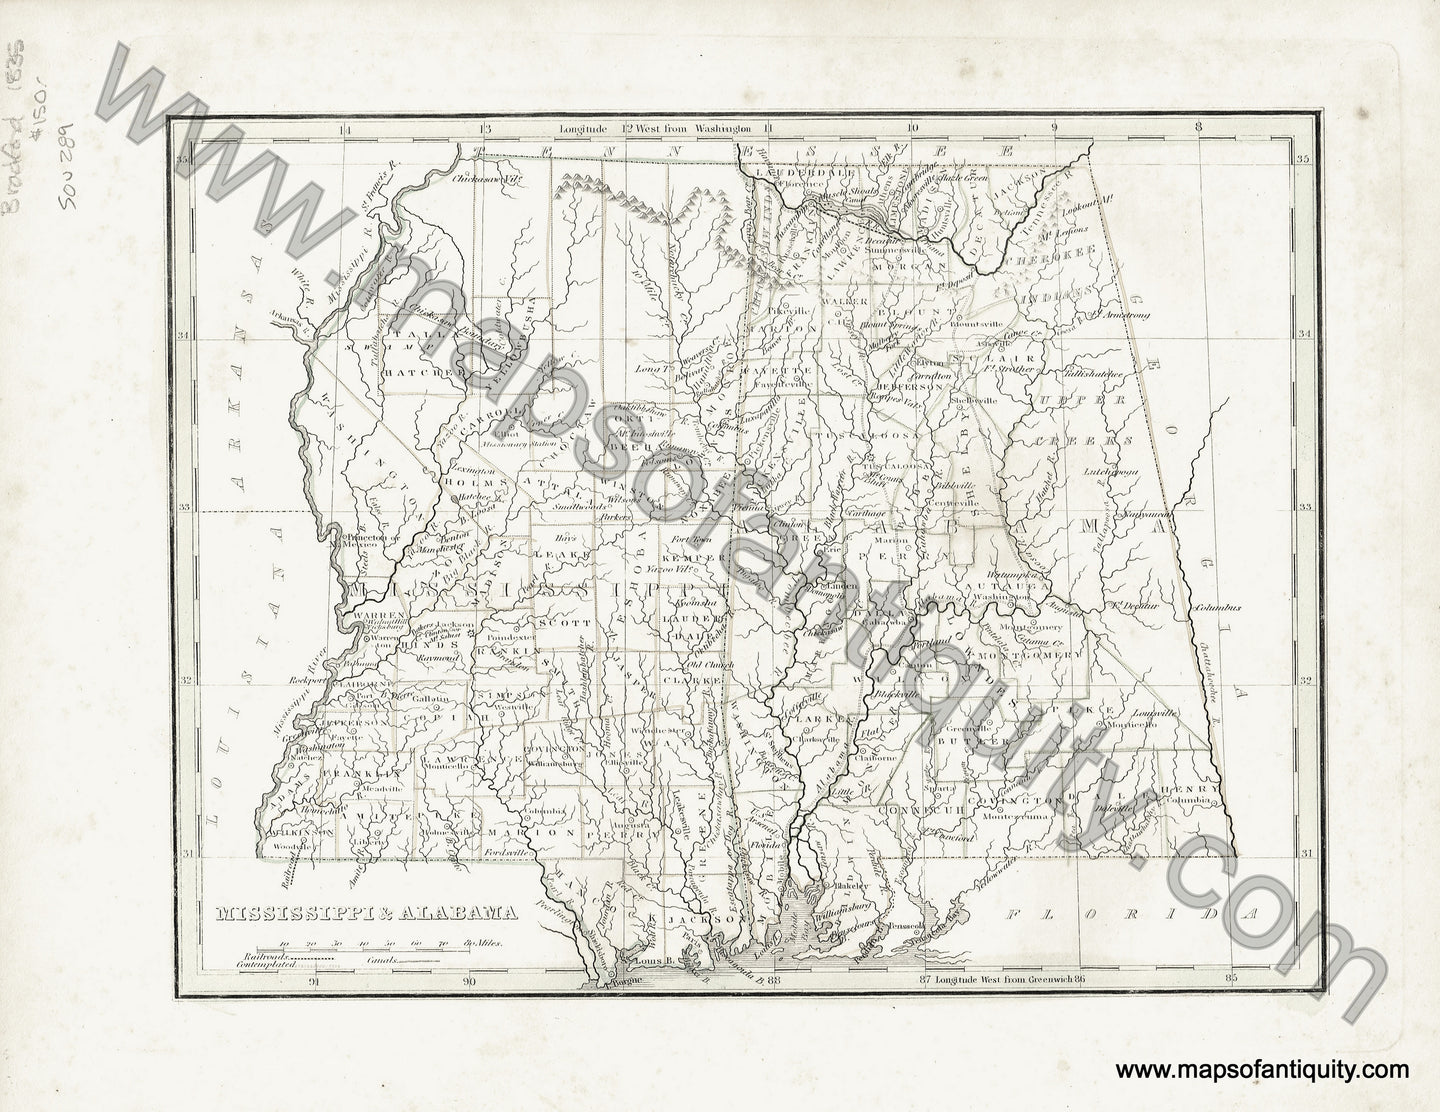 Antique-Hand-Colored-Map-Mississippi-&-Alabama-**********-United-States-South-1835-T.G.-Bradford-Maps-Of-Antiquity